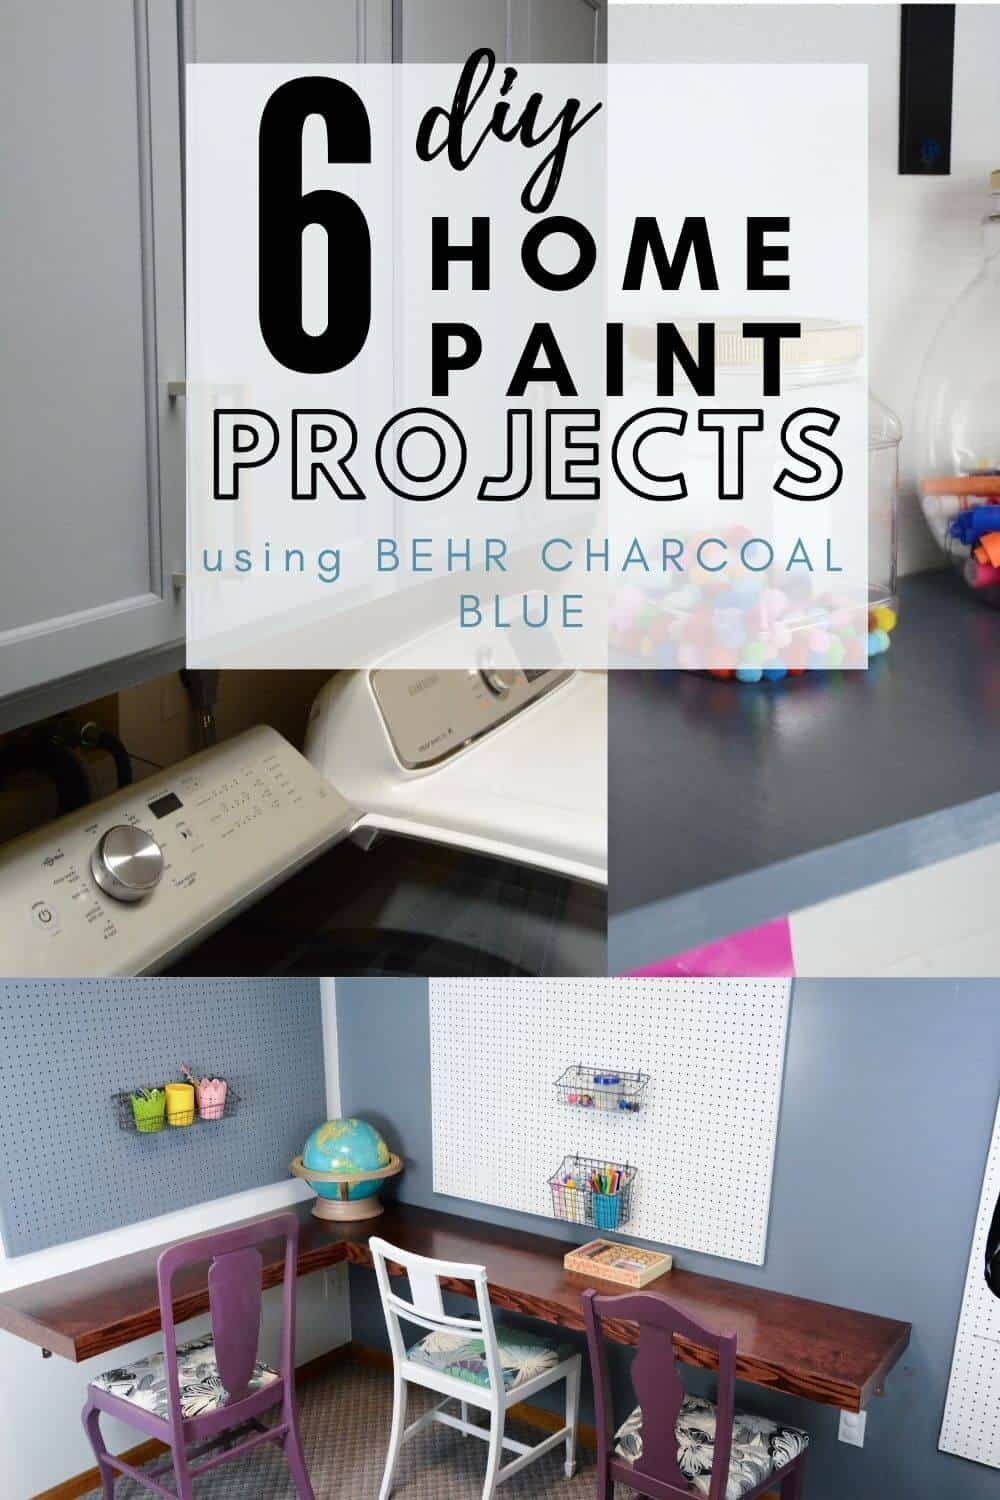 DIY Home paint projects using Behr Charcoal Blue Paint